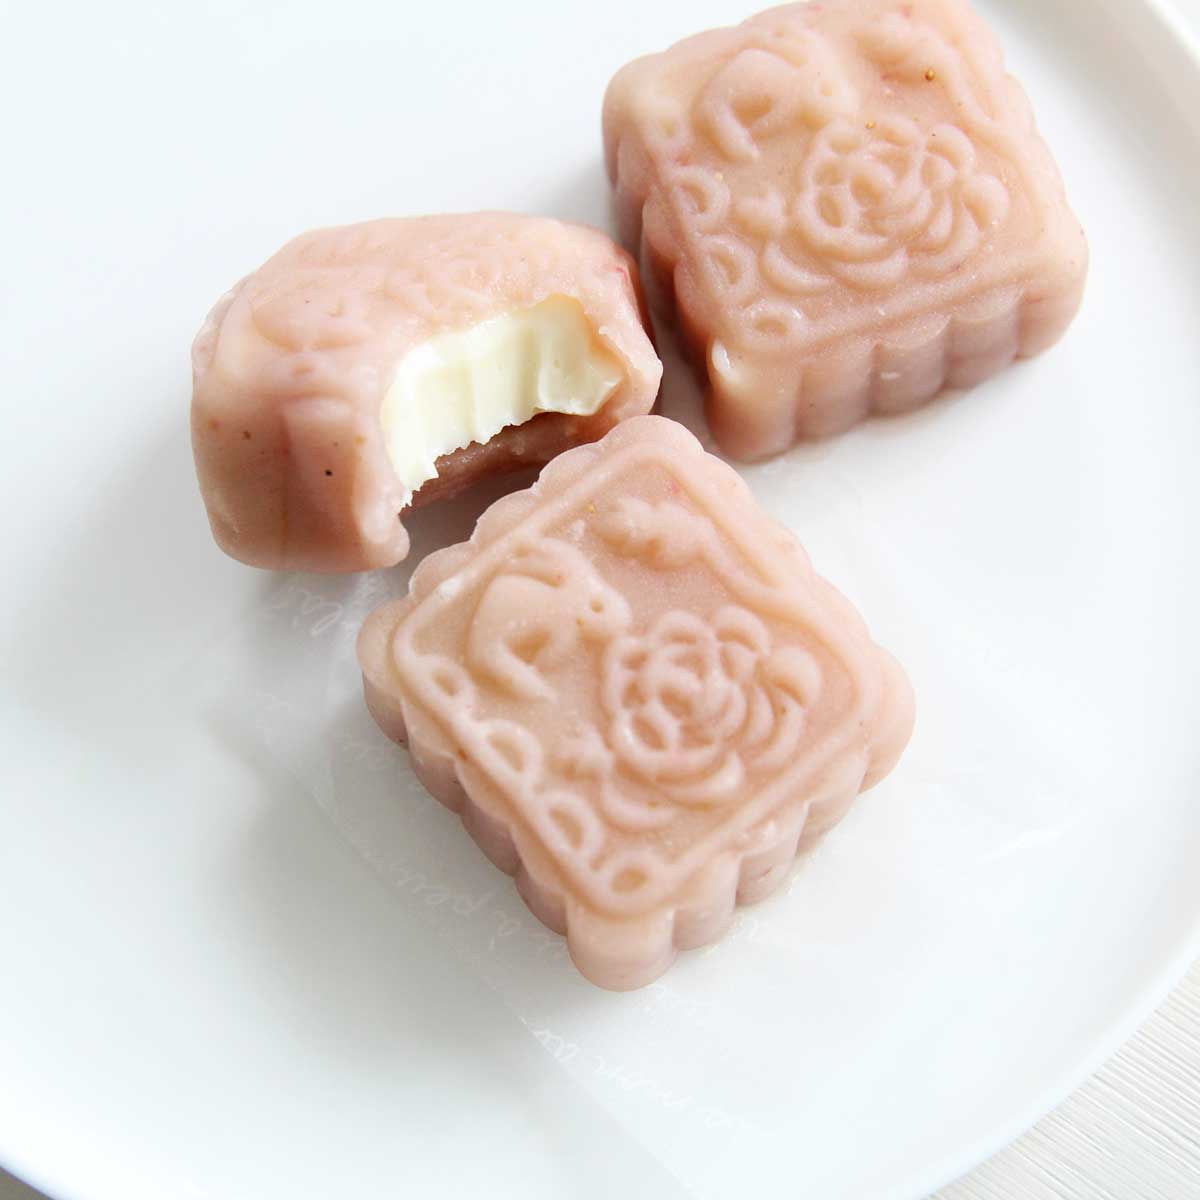 strawberry snowskin mooncakes with white filling